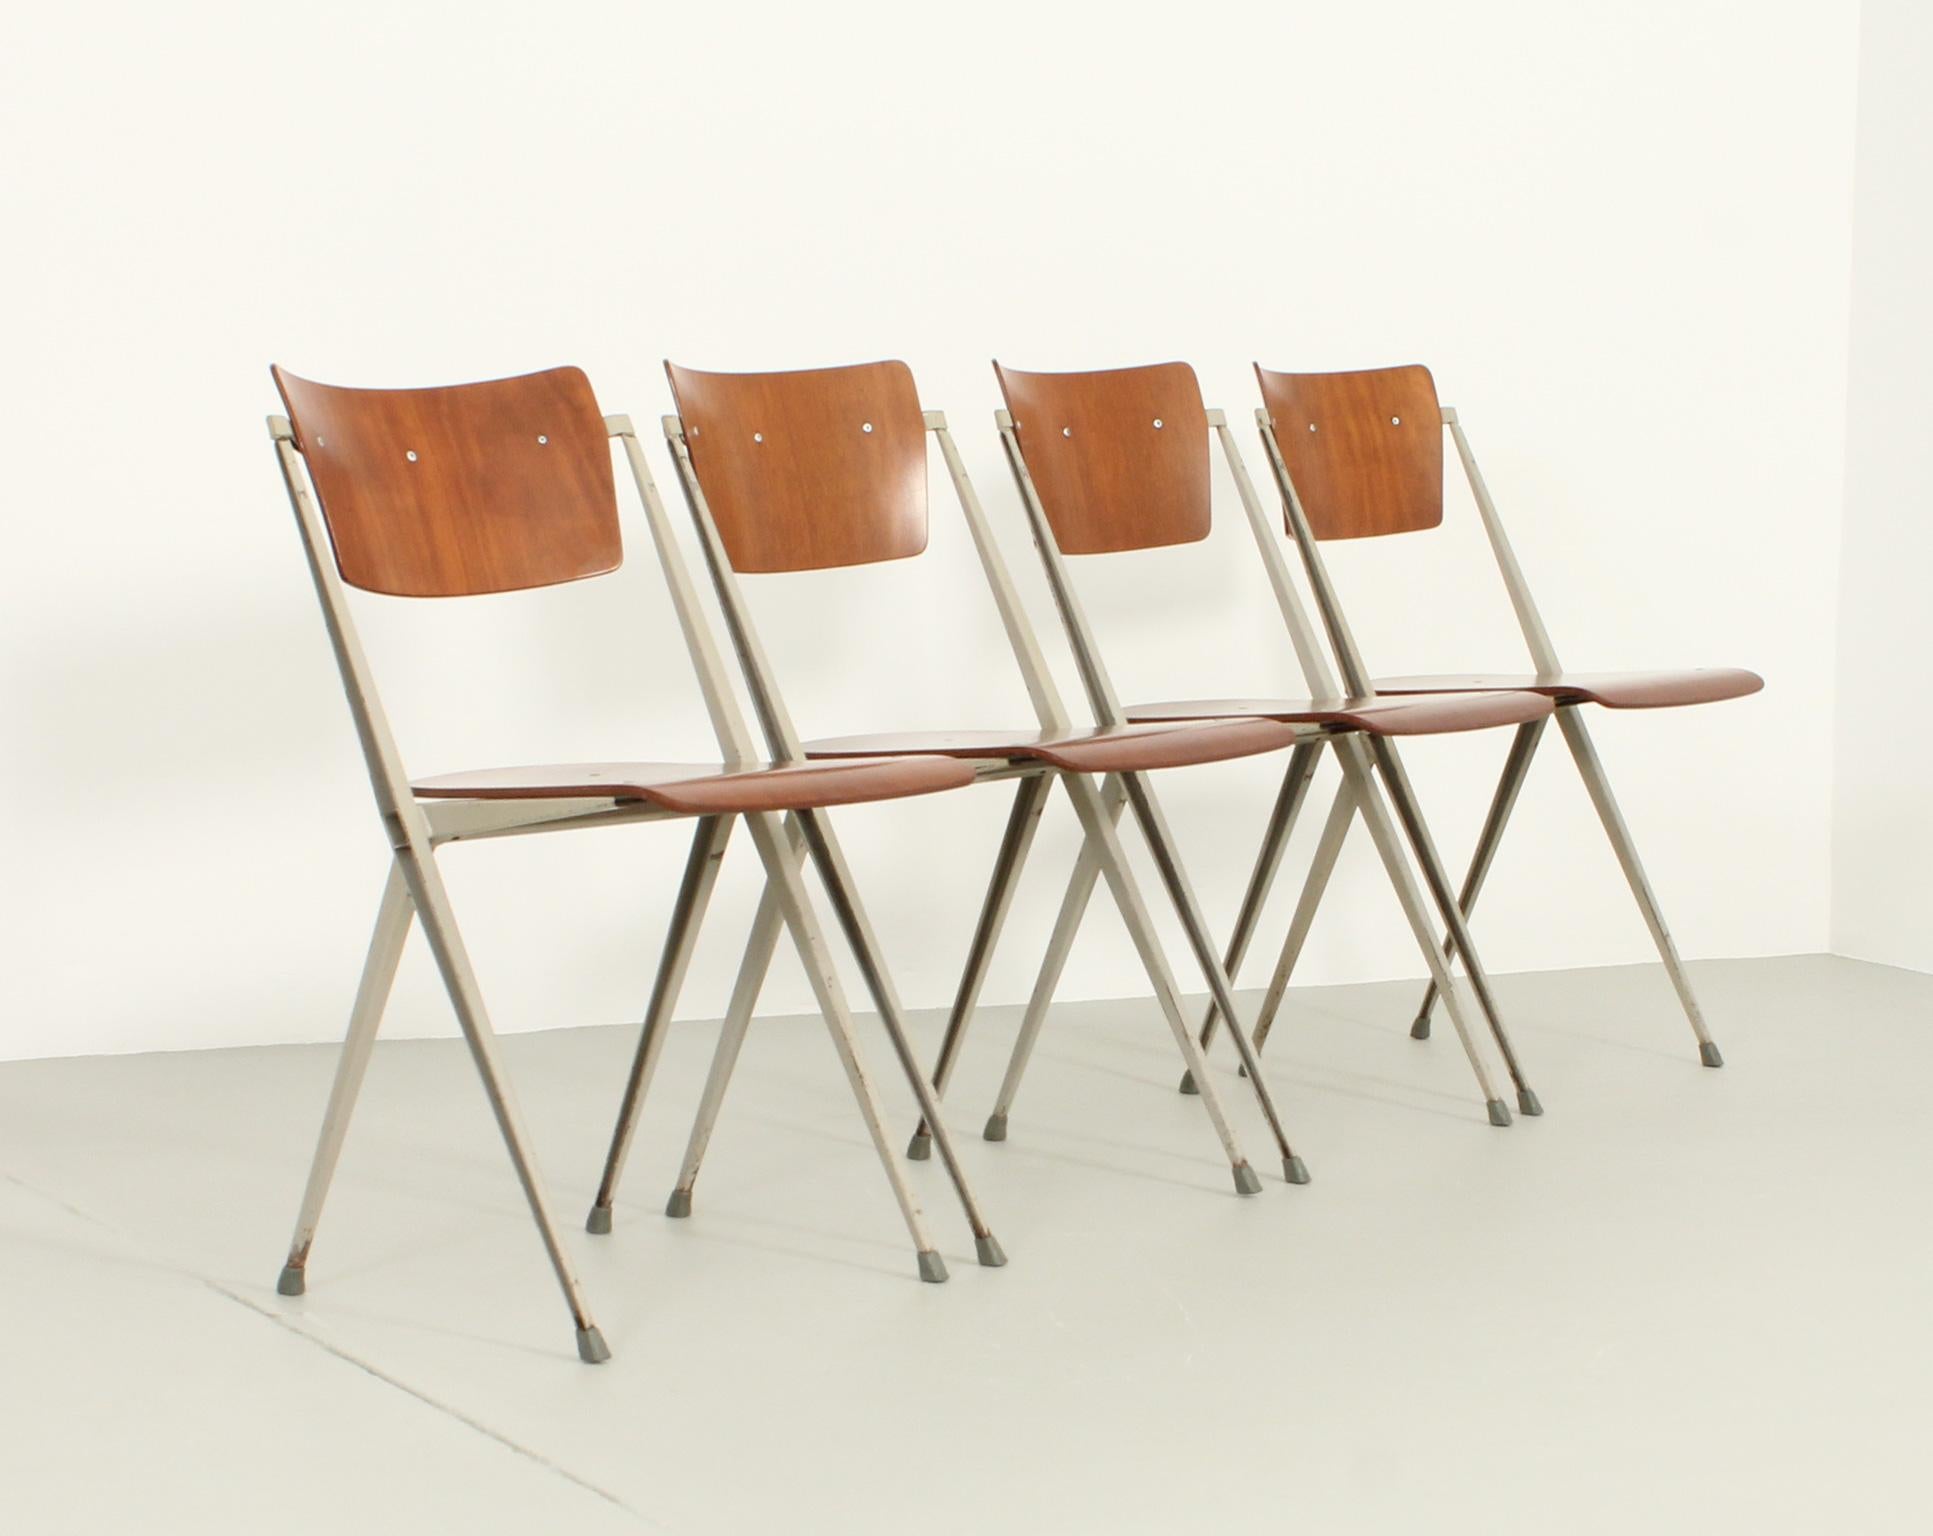 Set of four Pyramide chairs designed in 1964 by Wim Rietveld for De Cirkel, The Netherlands. Grey enamelled metal structure and teak wood. Stamped with the De Cirkel logo and dated from 1965.